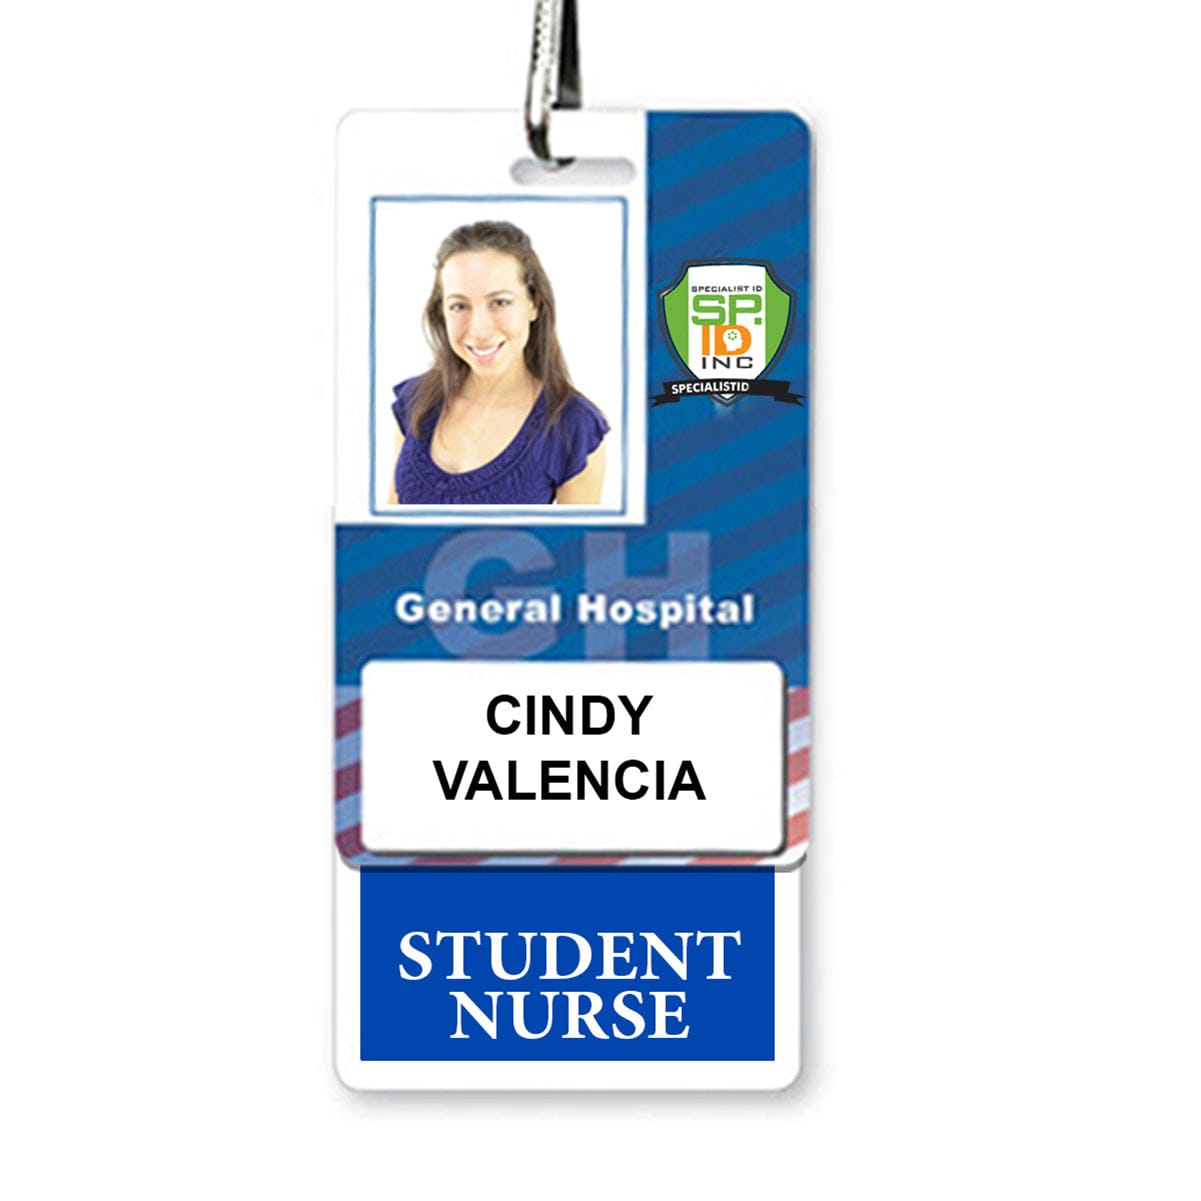 ID Badges for Healthcare Workers and Medical Facilities - SpecialistID –